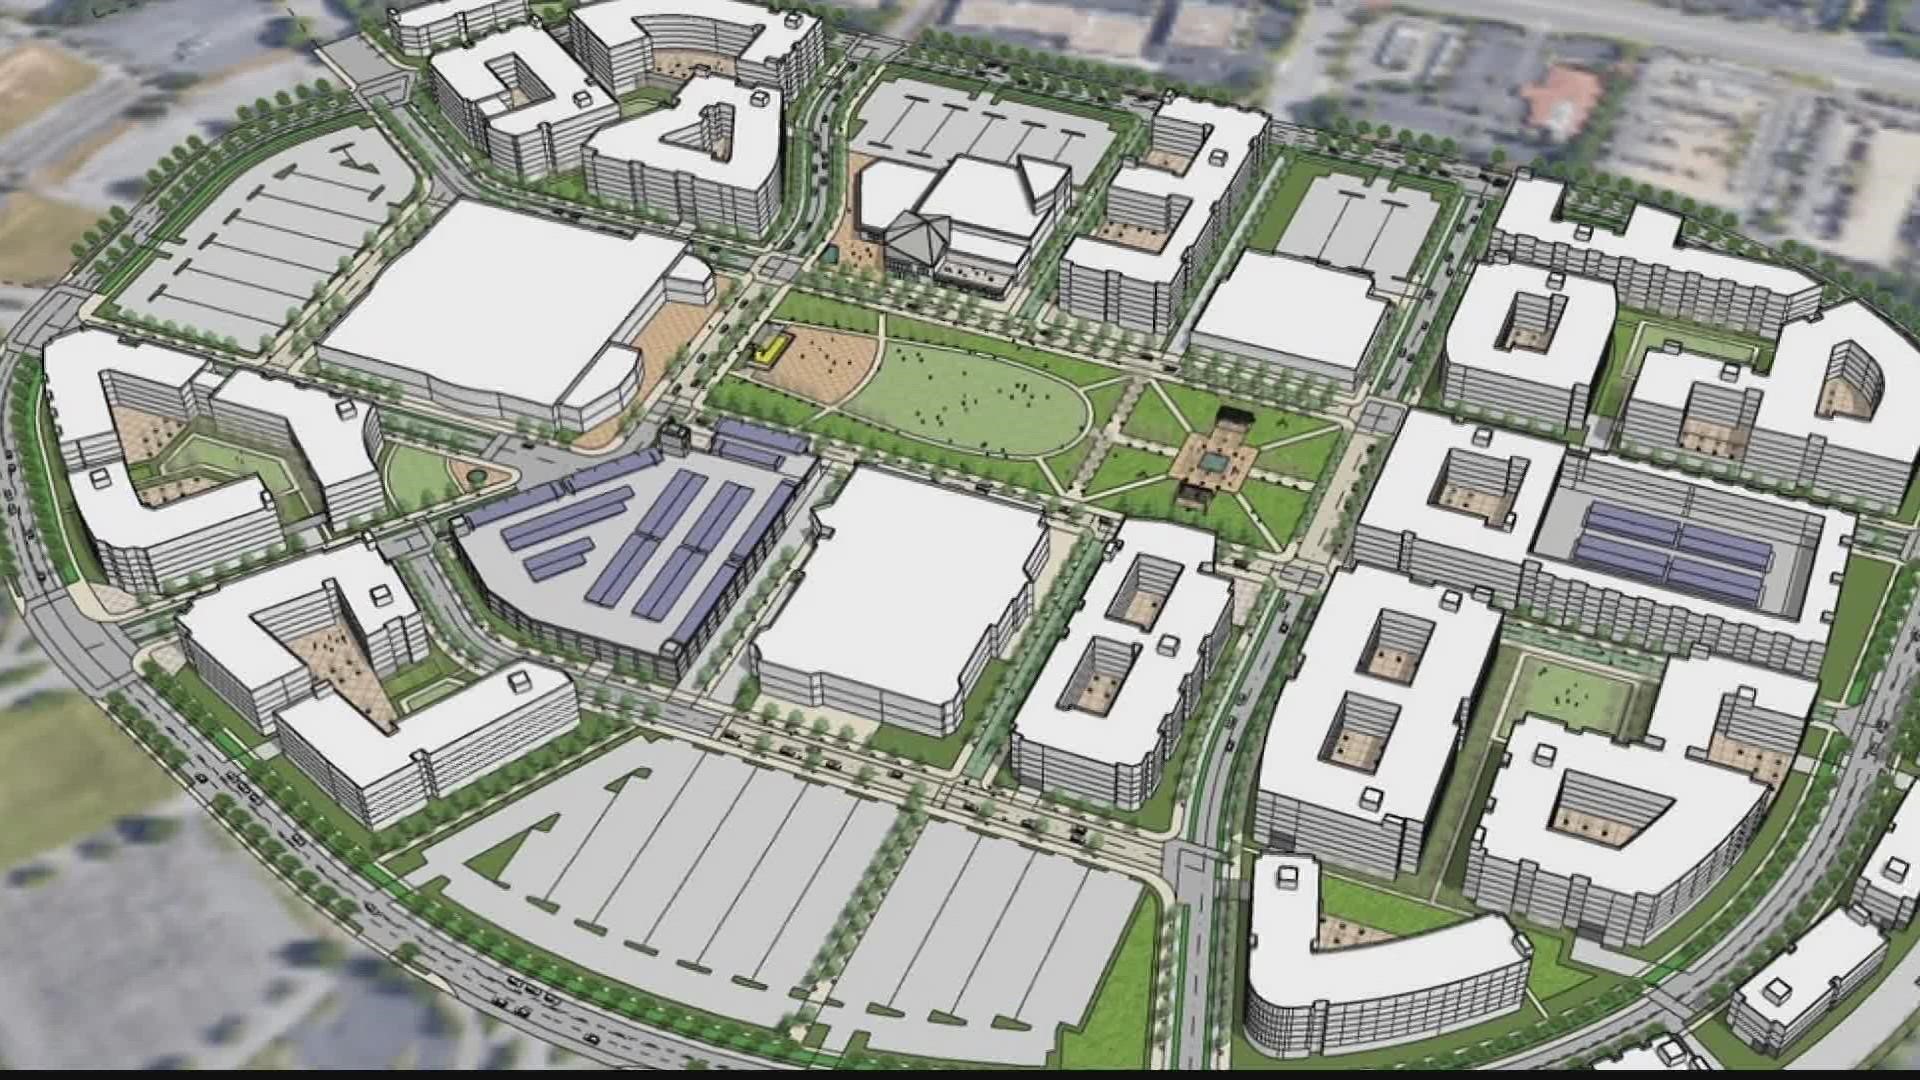 We have our first look at revitalization plans for Gwinnett Place Mall. The mall is most recently known for being featured in "Stranger Things."